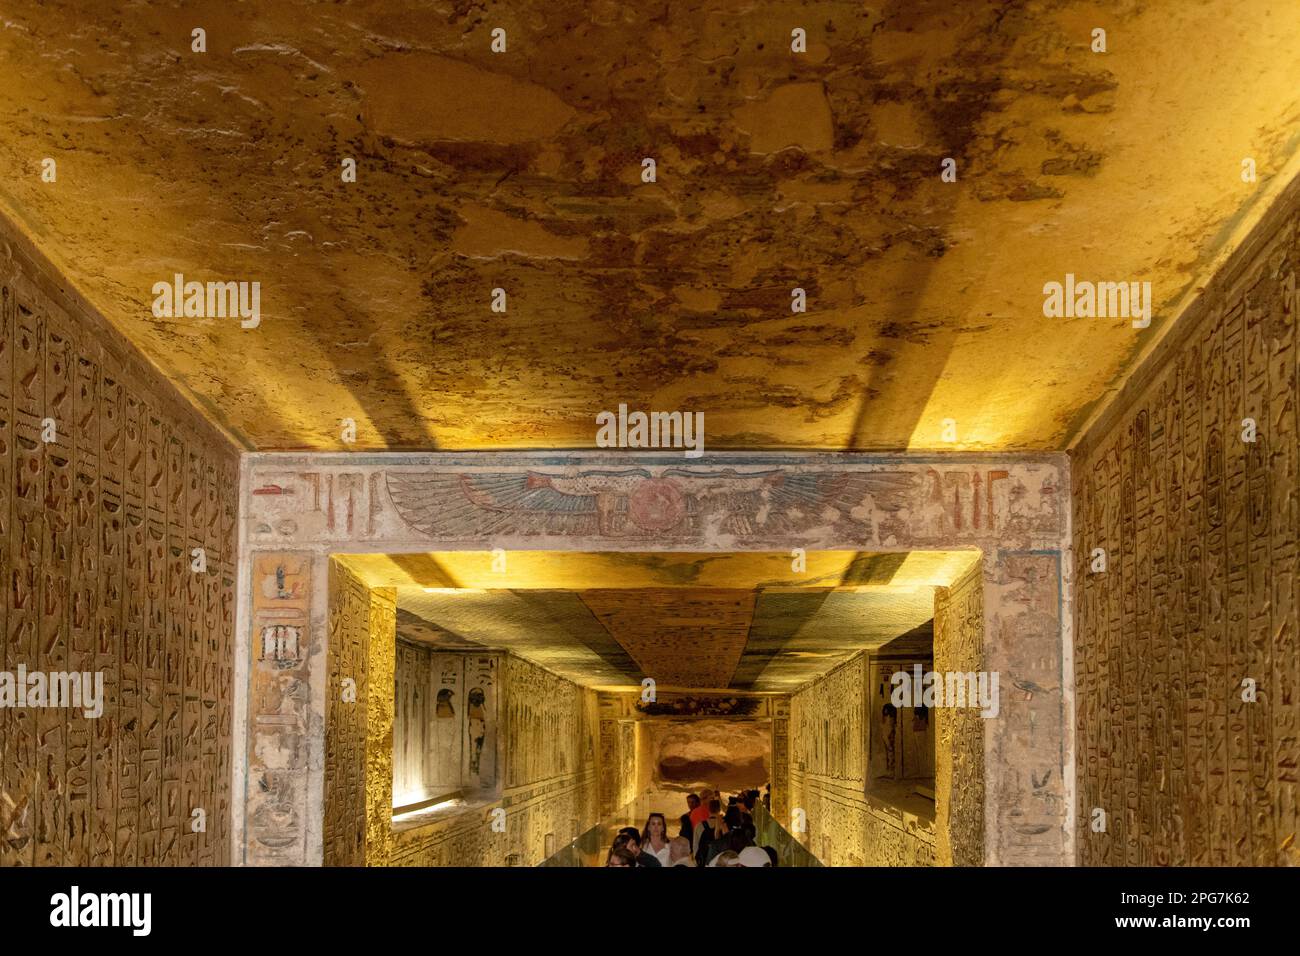 Inside Tomb of Ramesses III, Valley of the Kings, near Luxor, Egypt Stock Photo